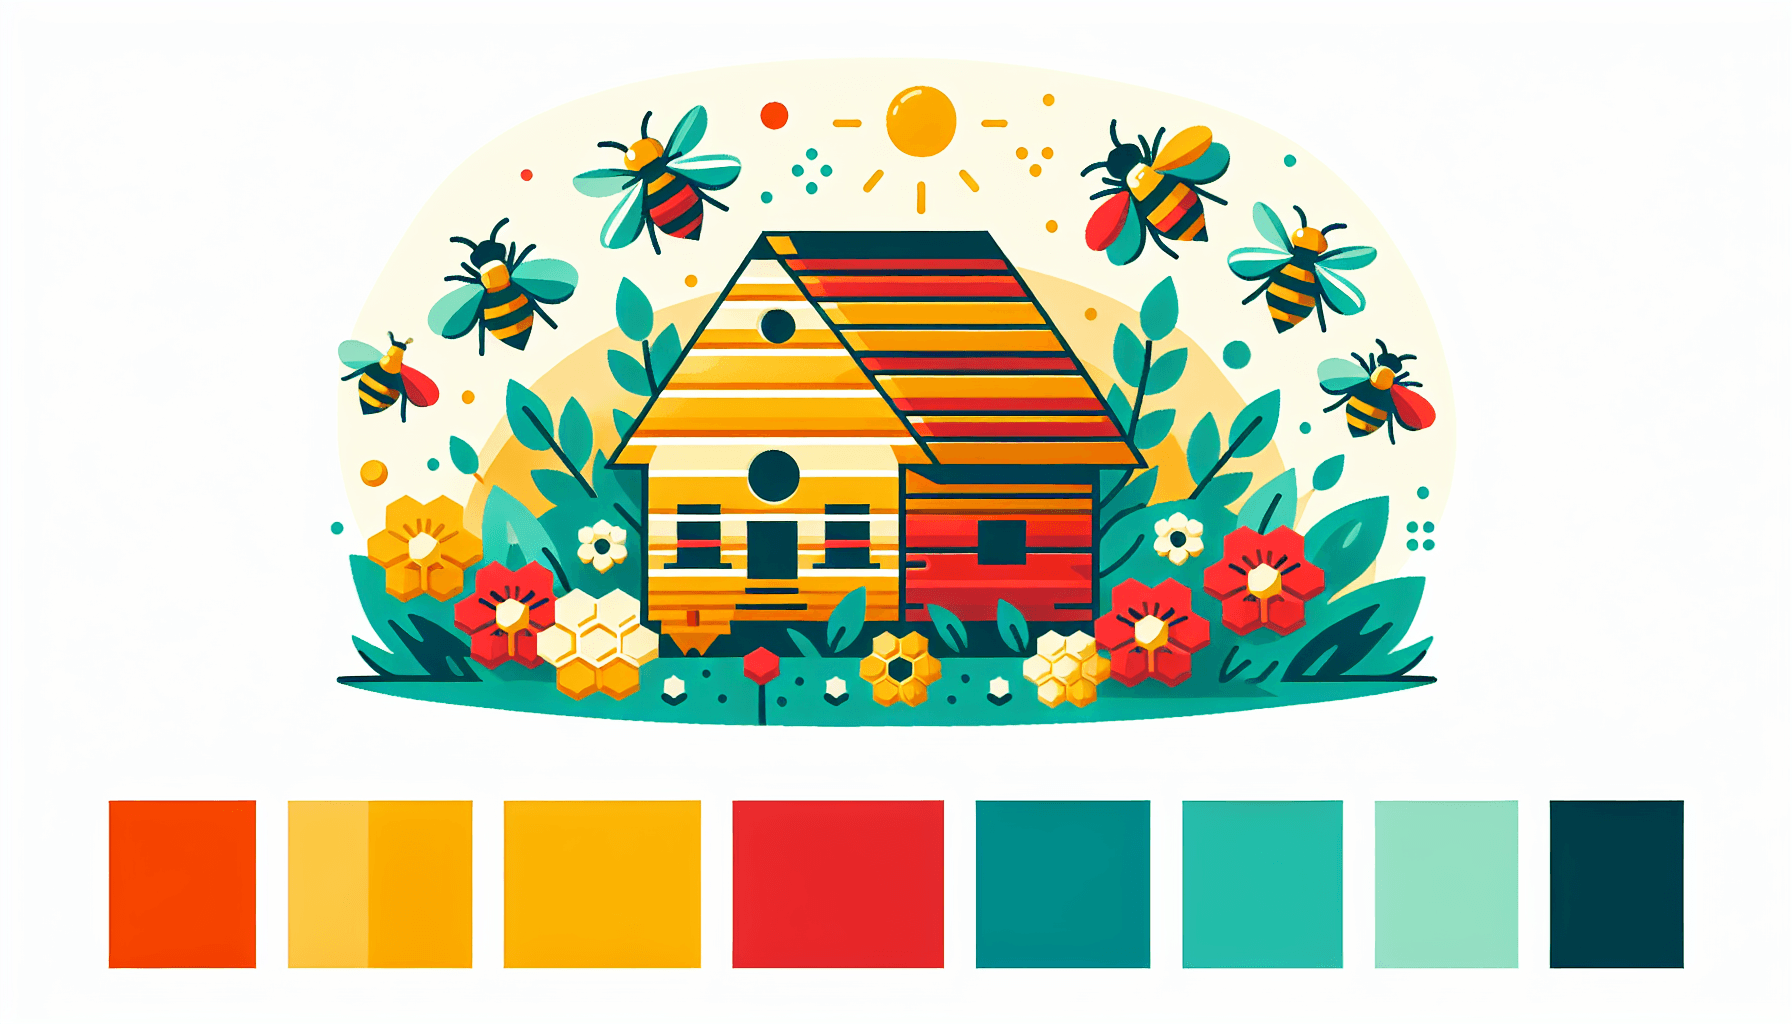 Beehive in flat illustration style and white background, red #f47574, green #88c7a8, yellow #fcc44b, and blue #645bc8 colors.